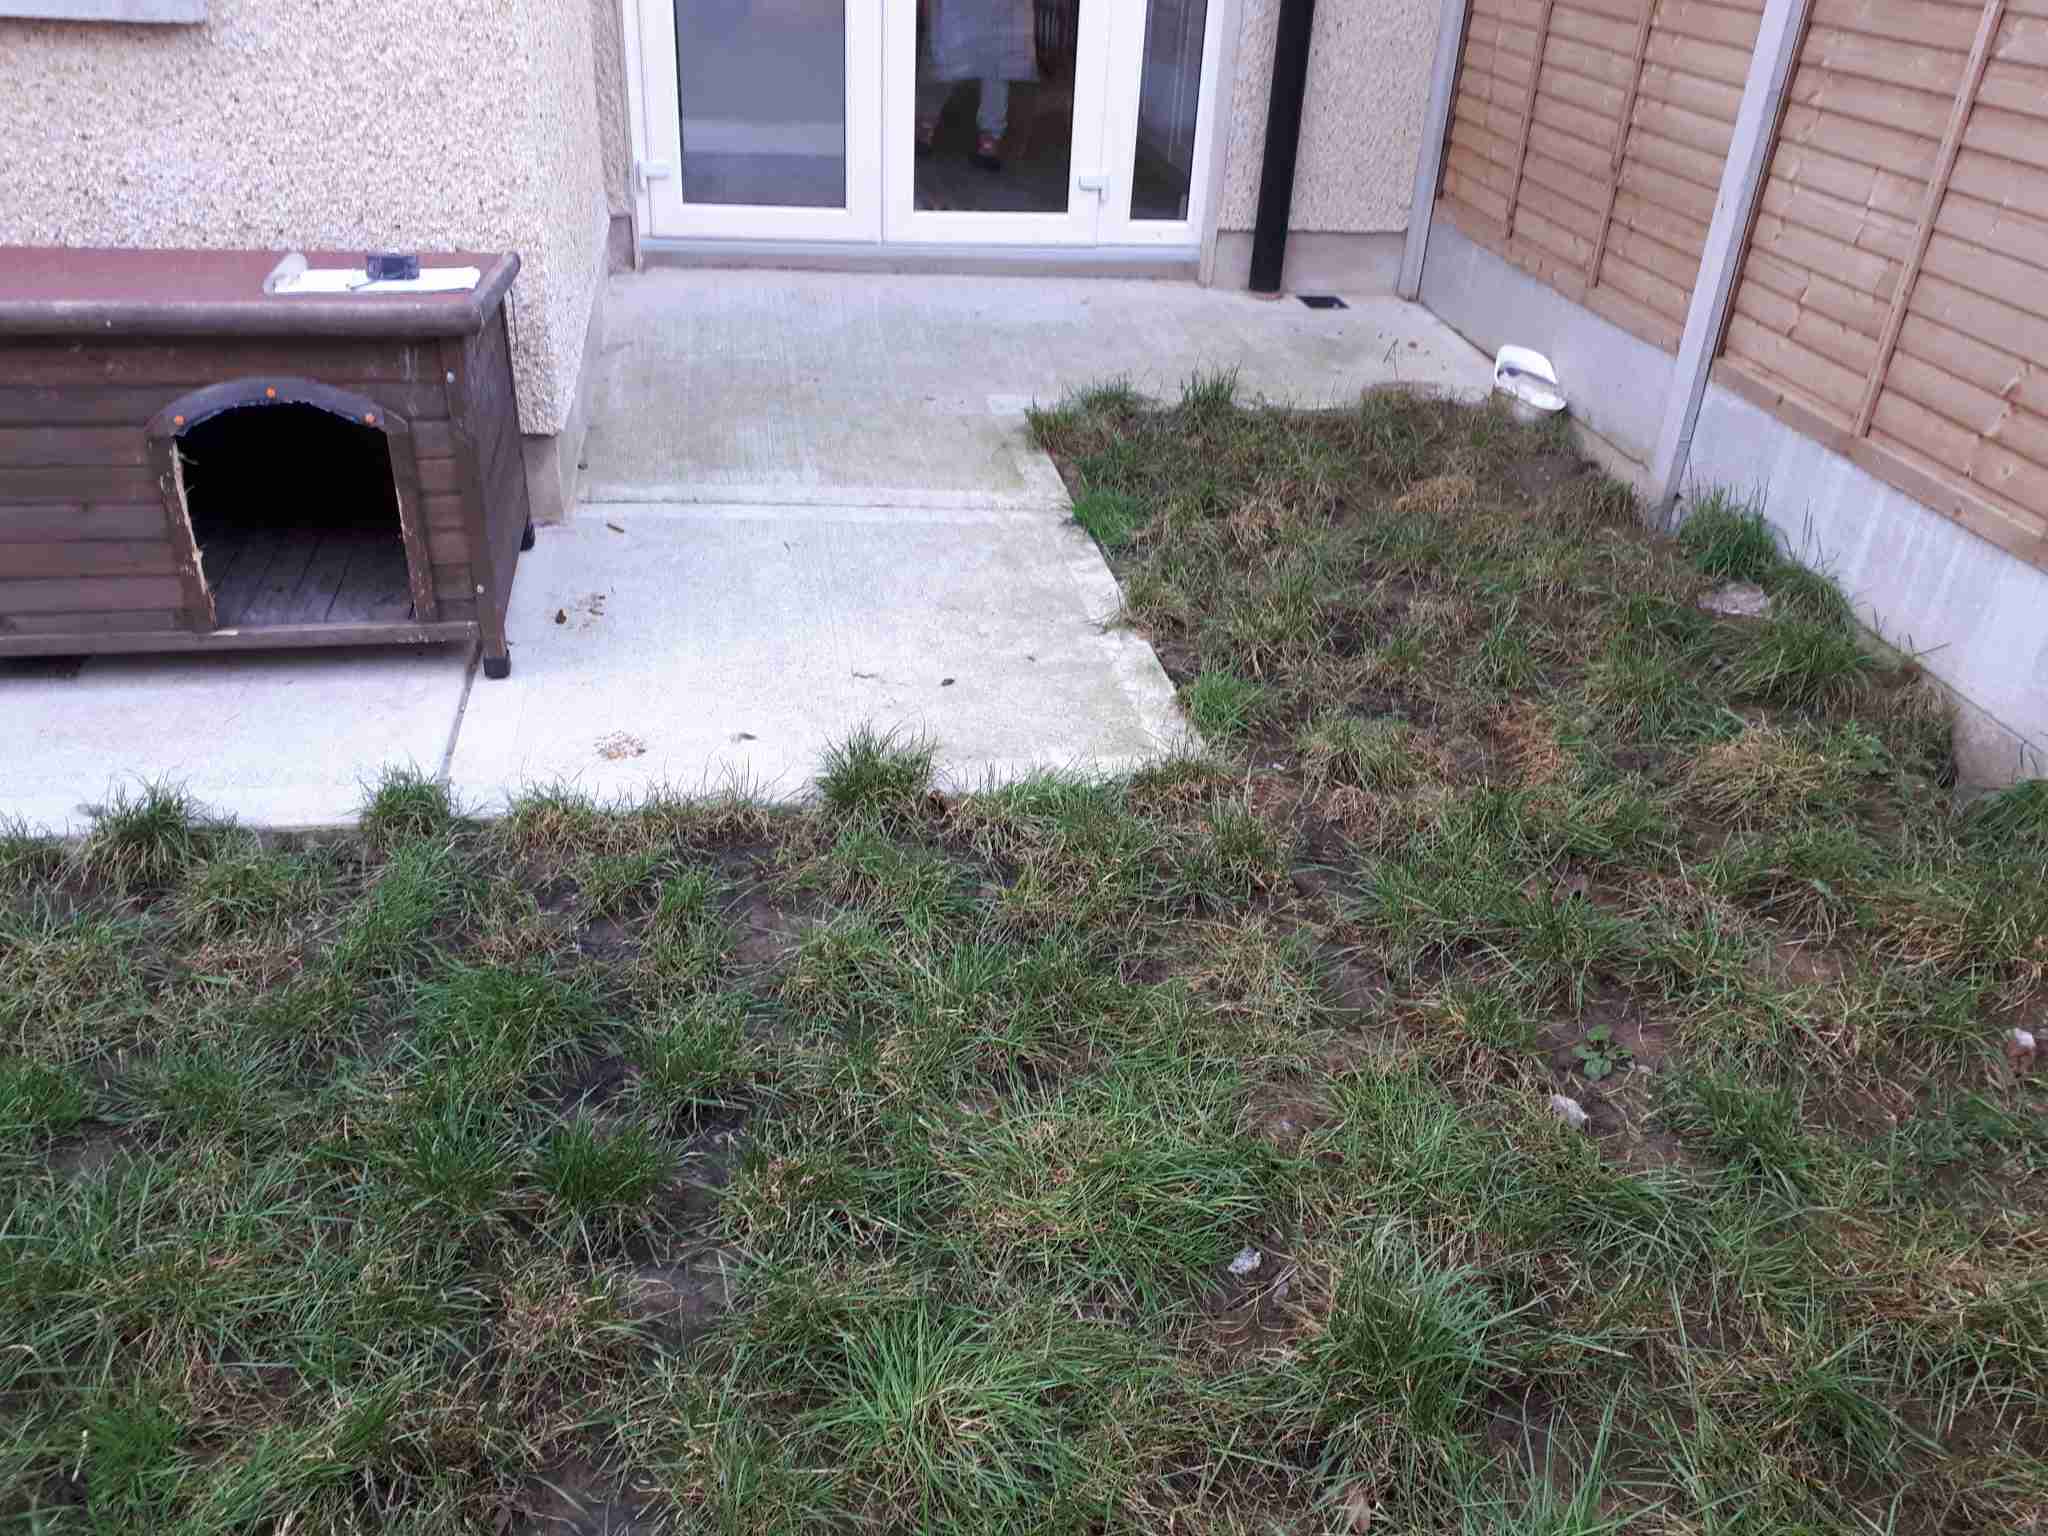 Image of lawn in poor condition, patchy due to animals and wet weather